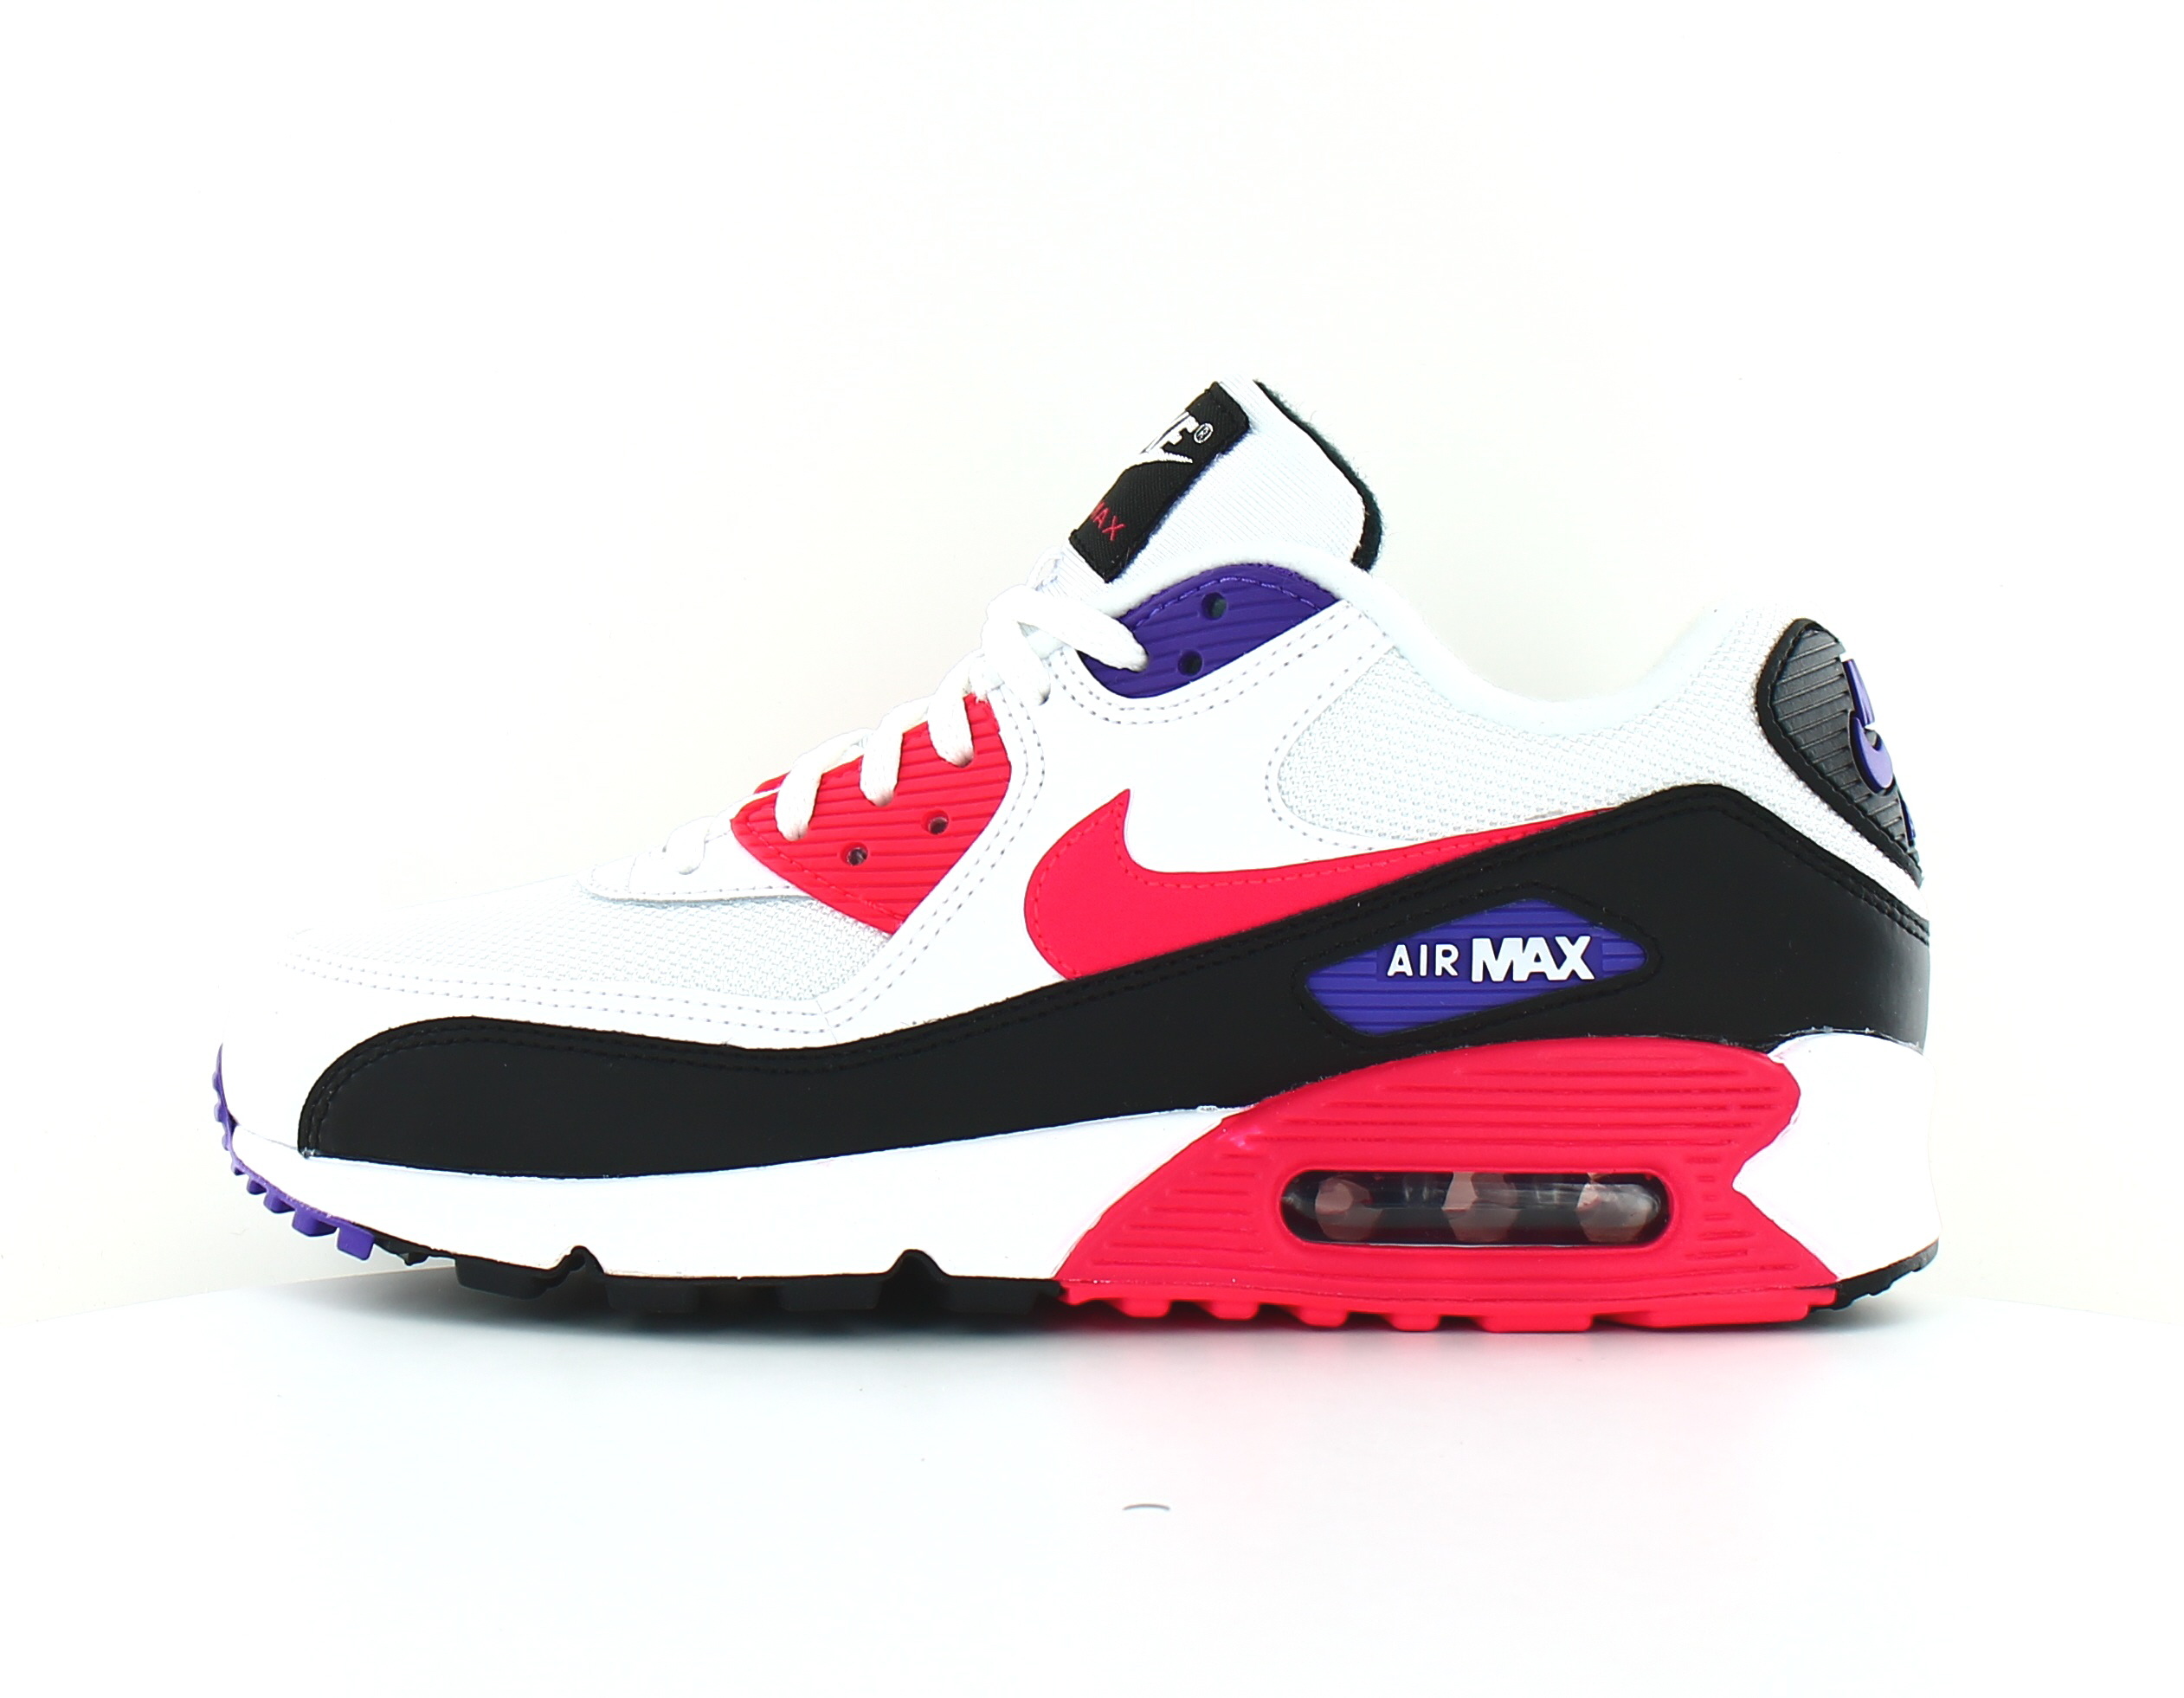 air max homme 90 blanche violet بخاخ منظف المكيف